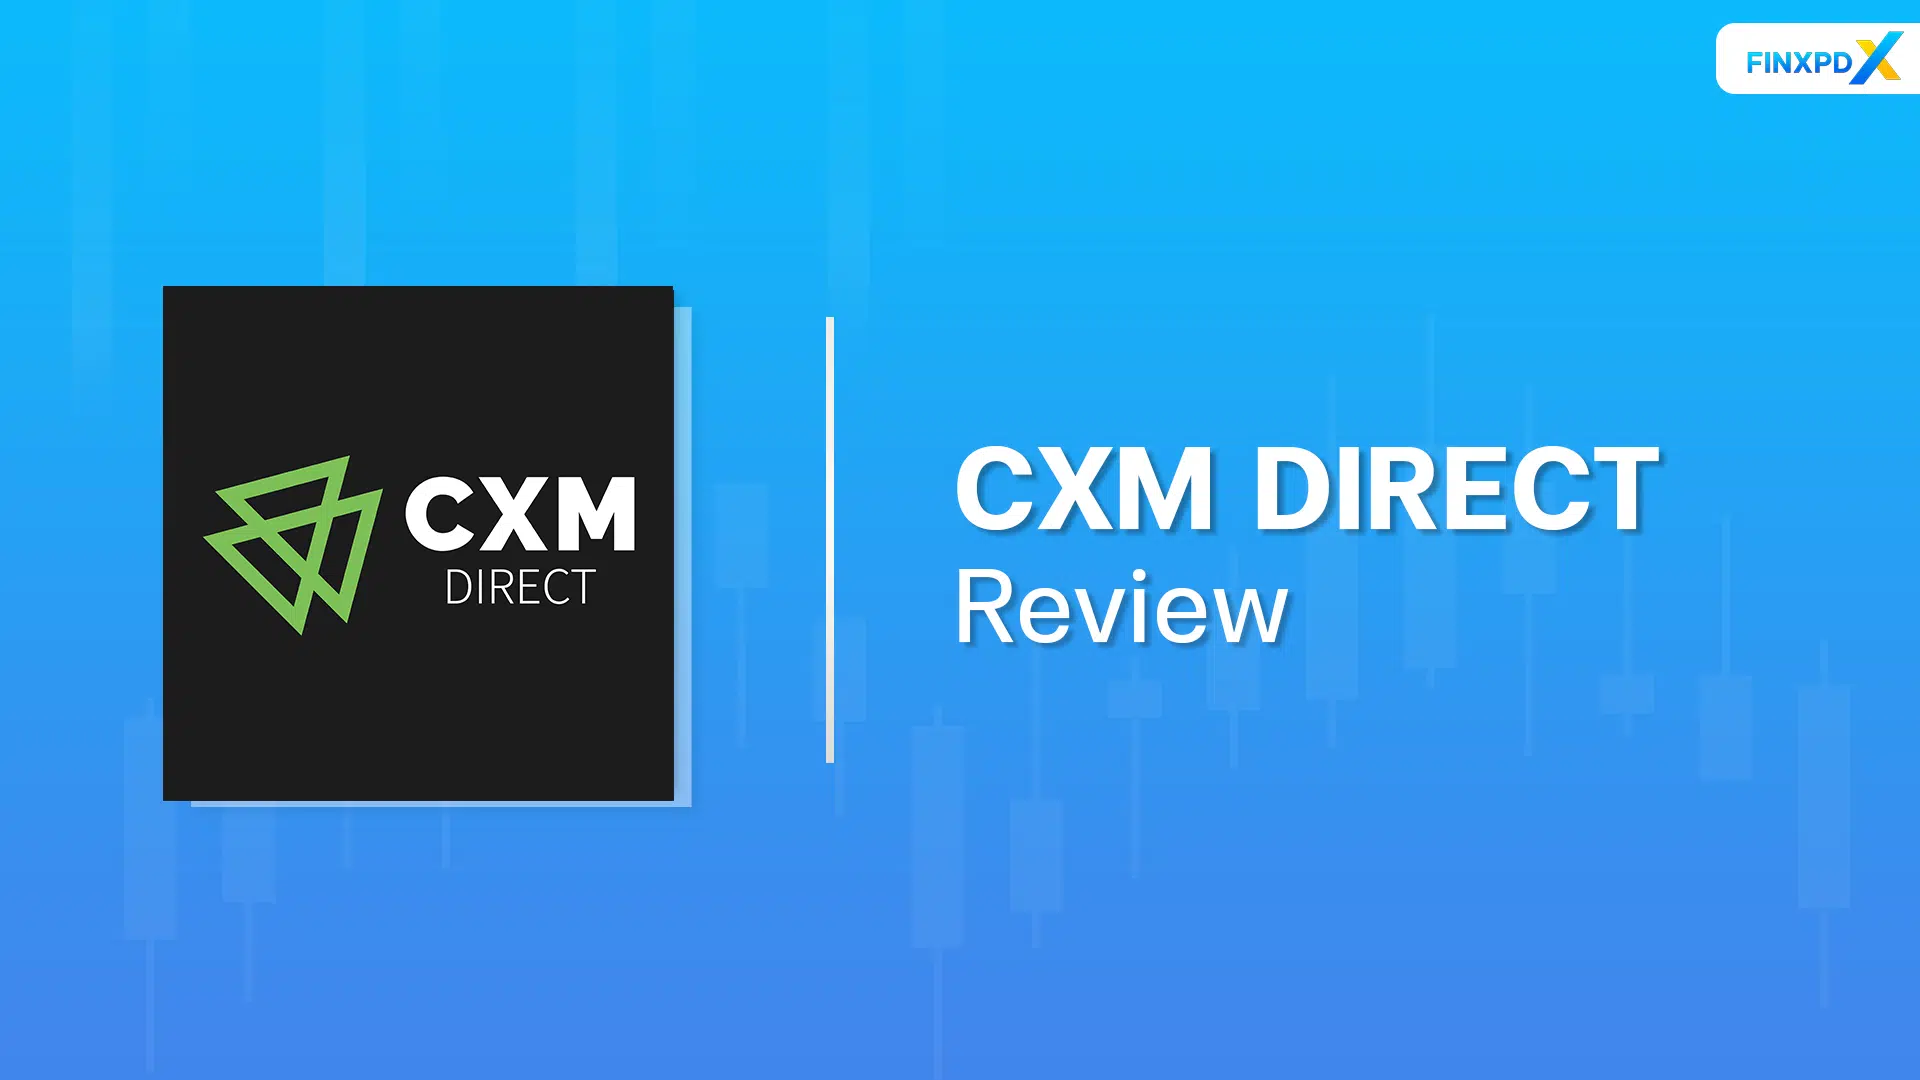 CXM Direct Review: Services, Features, and User Feedback